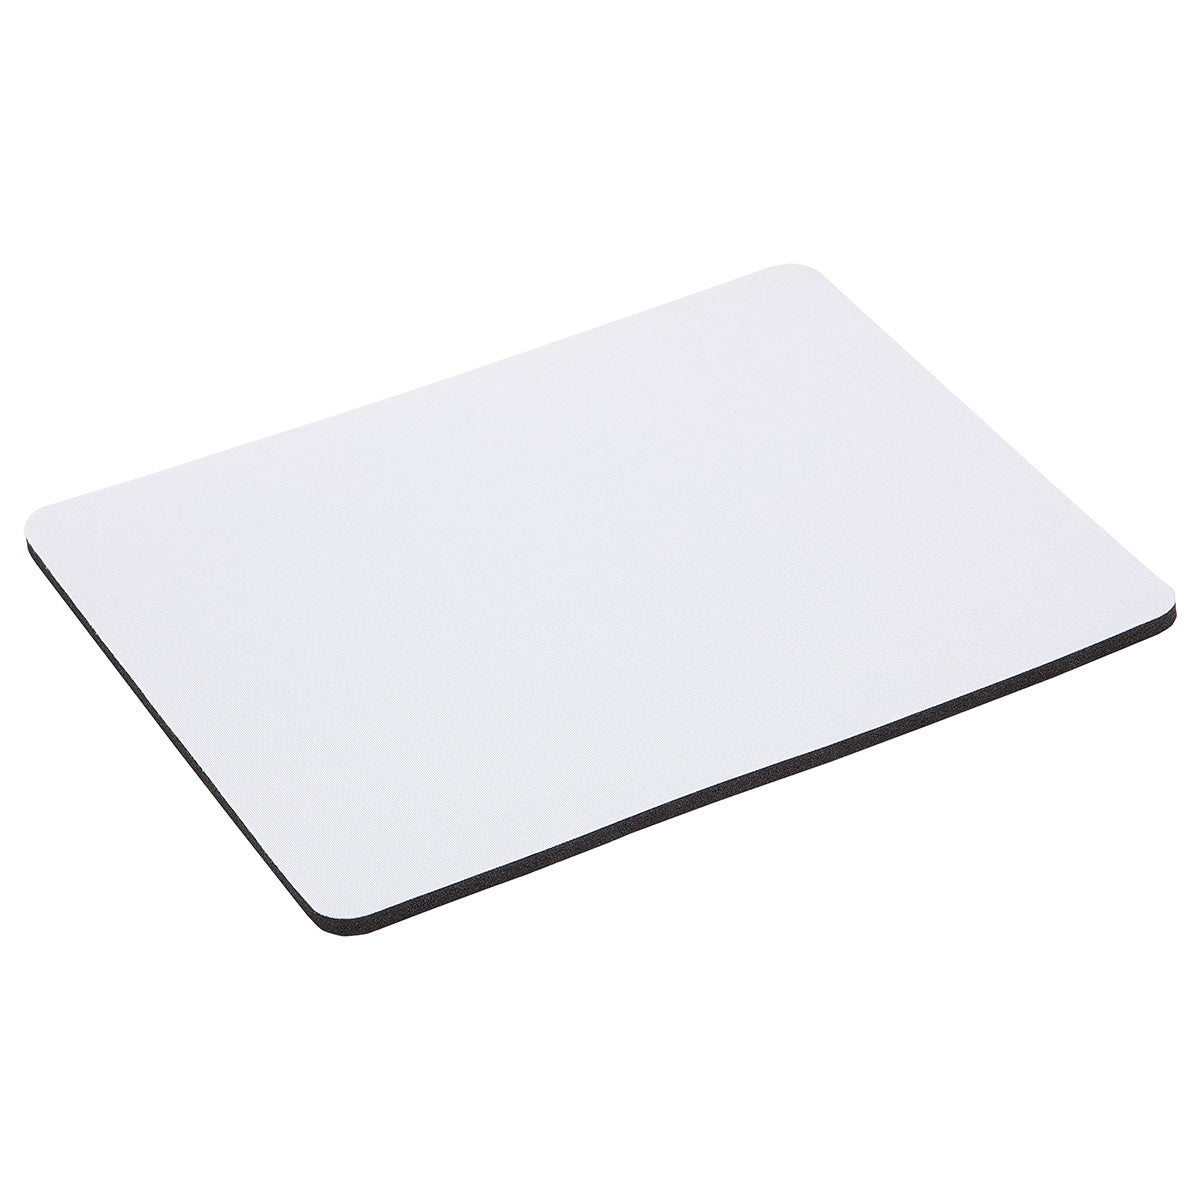 Accent Mouse Pad with Antimicrobial Additive